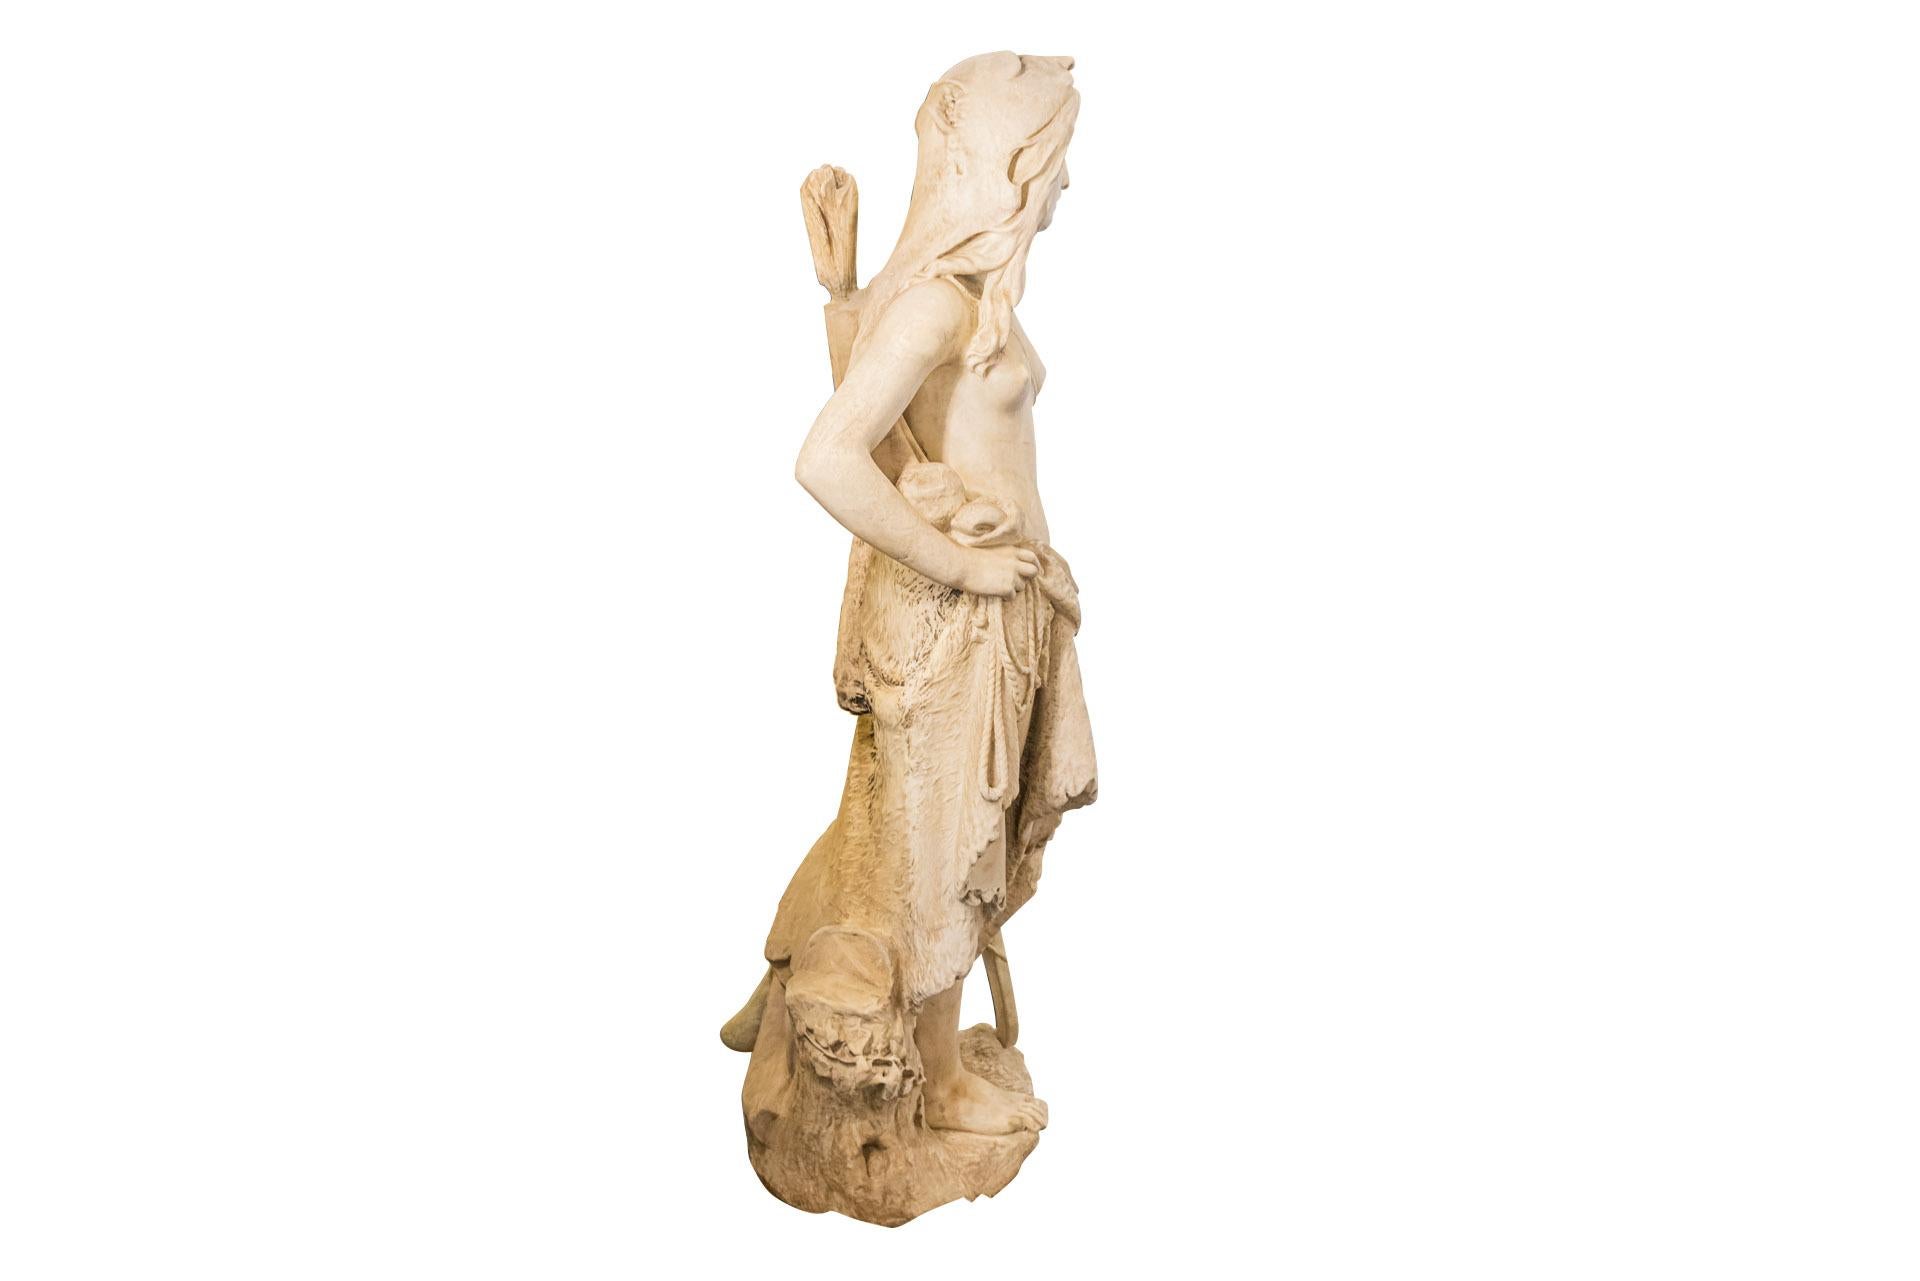 Symbolist interpretation of Artemis,
Representing a woman dressed in a loincloth and carrying a quiver, a bow in one hand and a rope in the other, as well as an animal skin,
The torso is represented naked, the eyes are open and the mouth